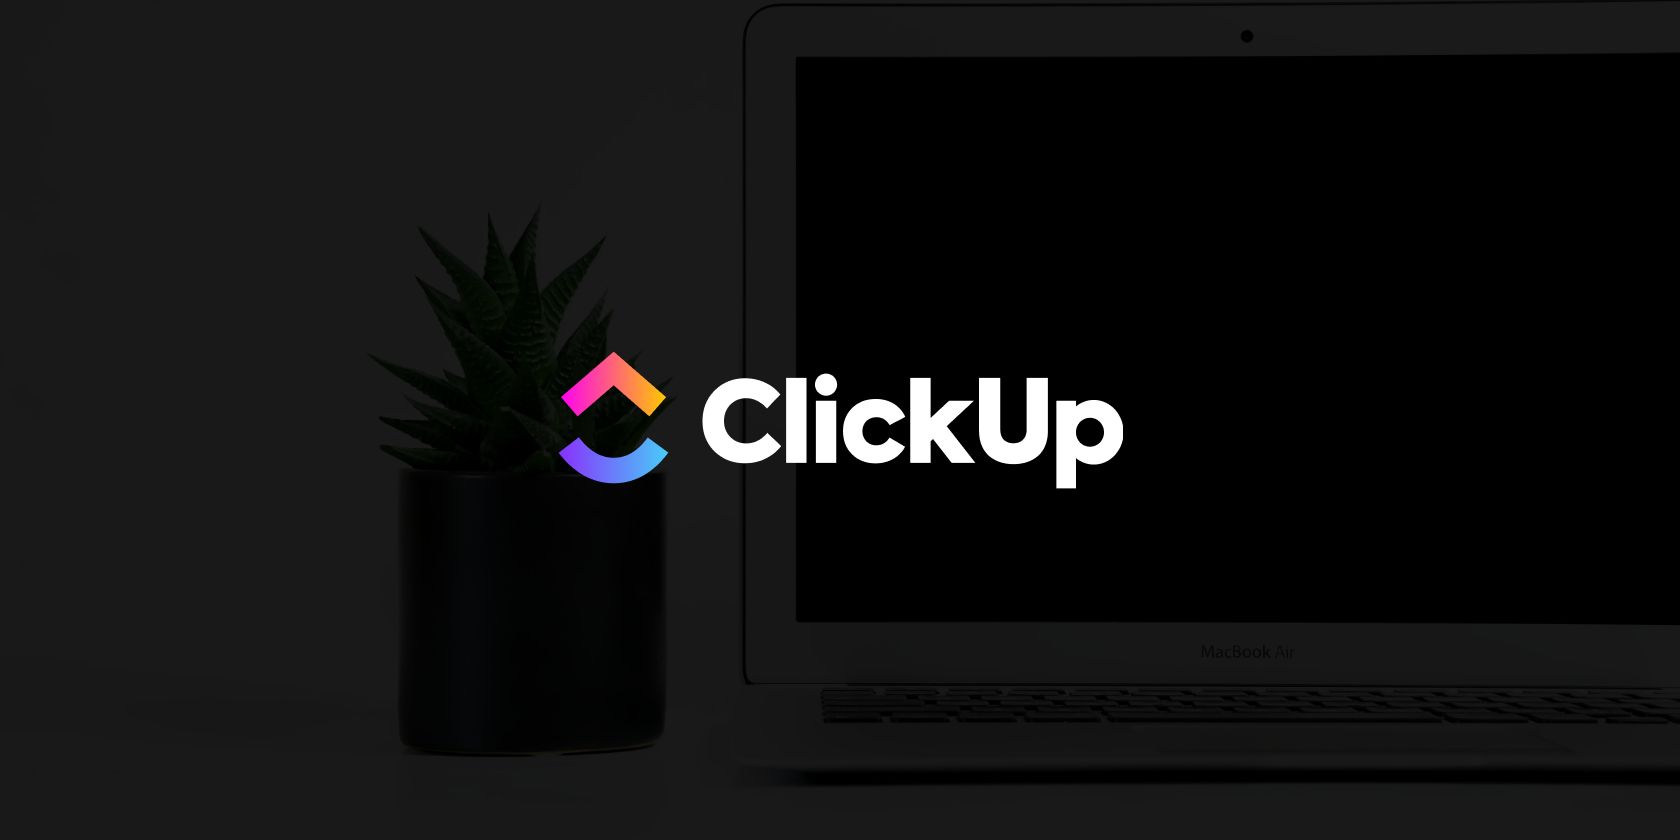 ClickUp logo over a laptop on a desk with a plant on a black background